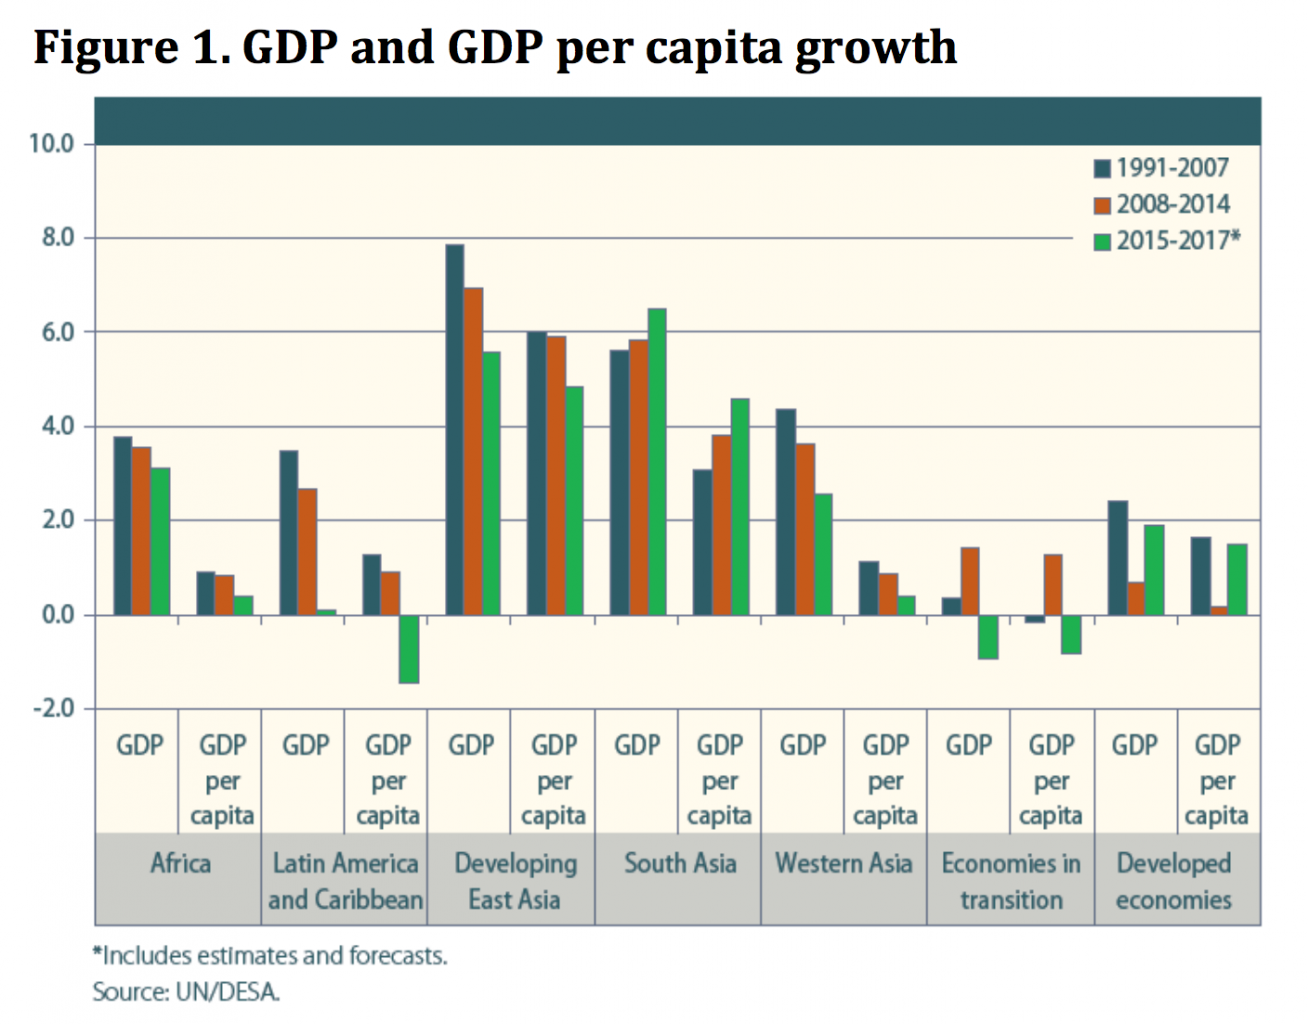 GDP and GDP per capita growth